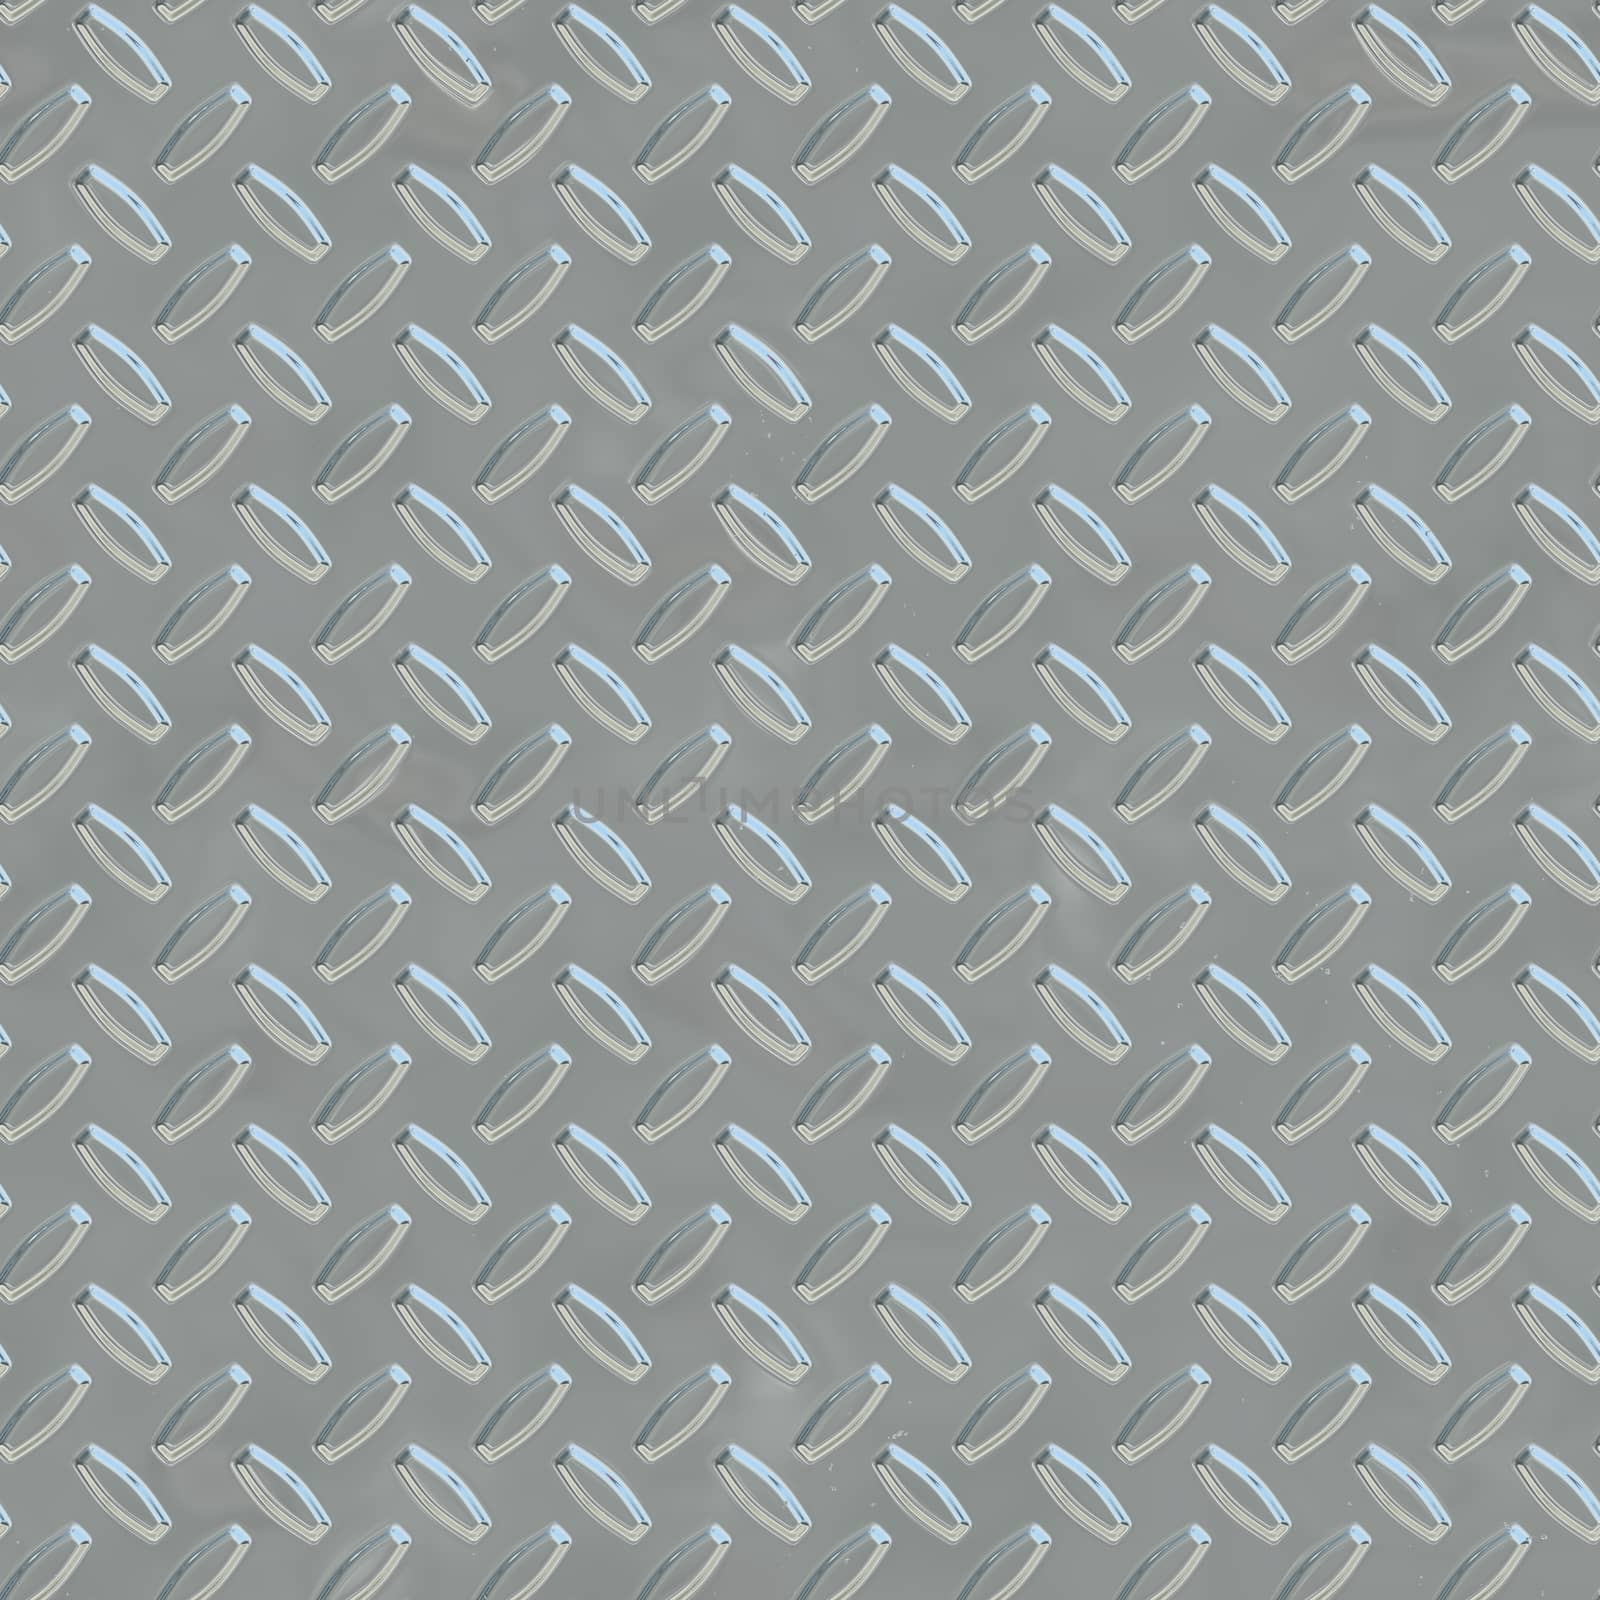 Steel Gray Metal Plate Seamless Texture by whitechild